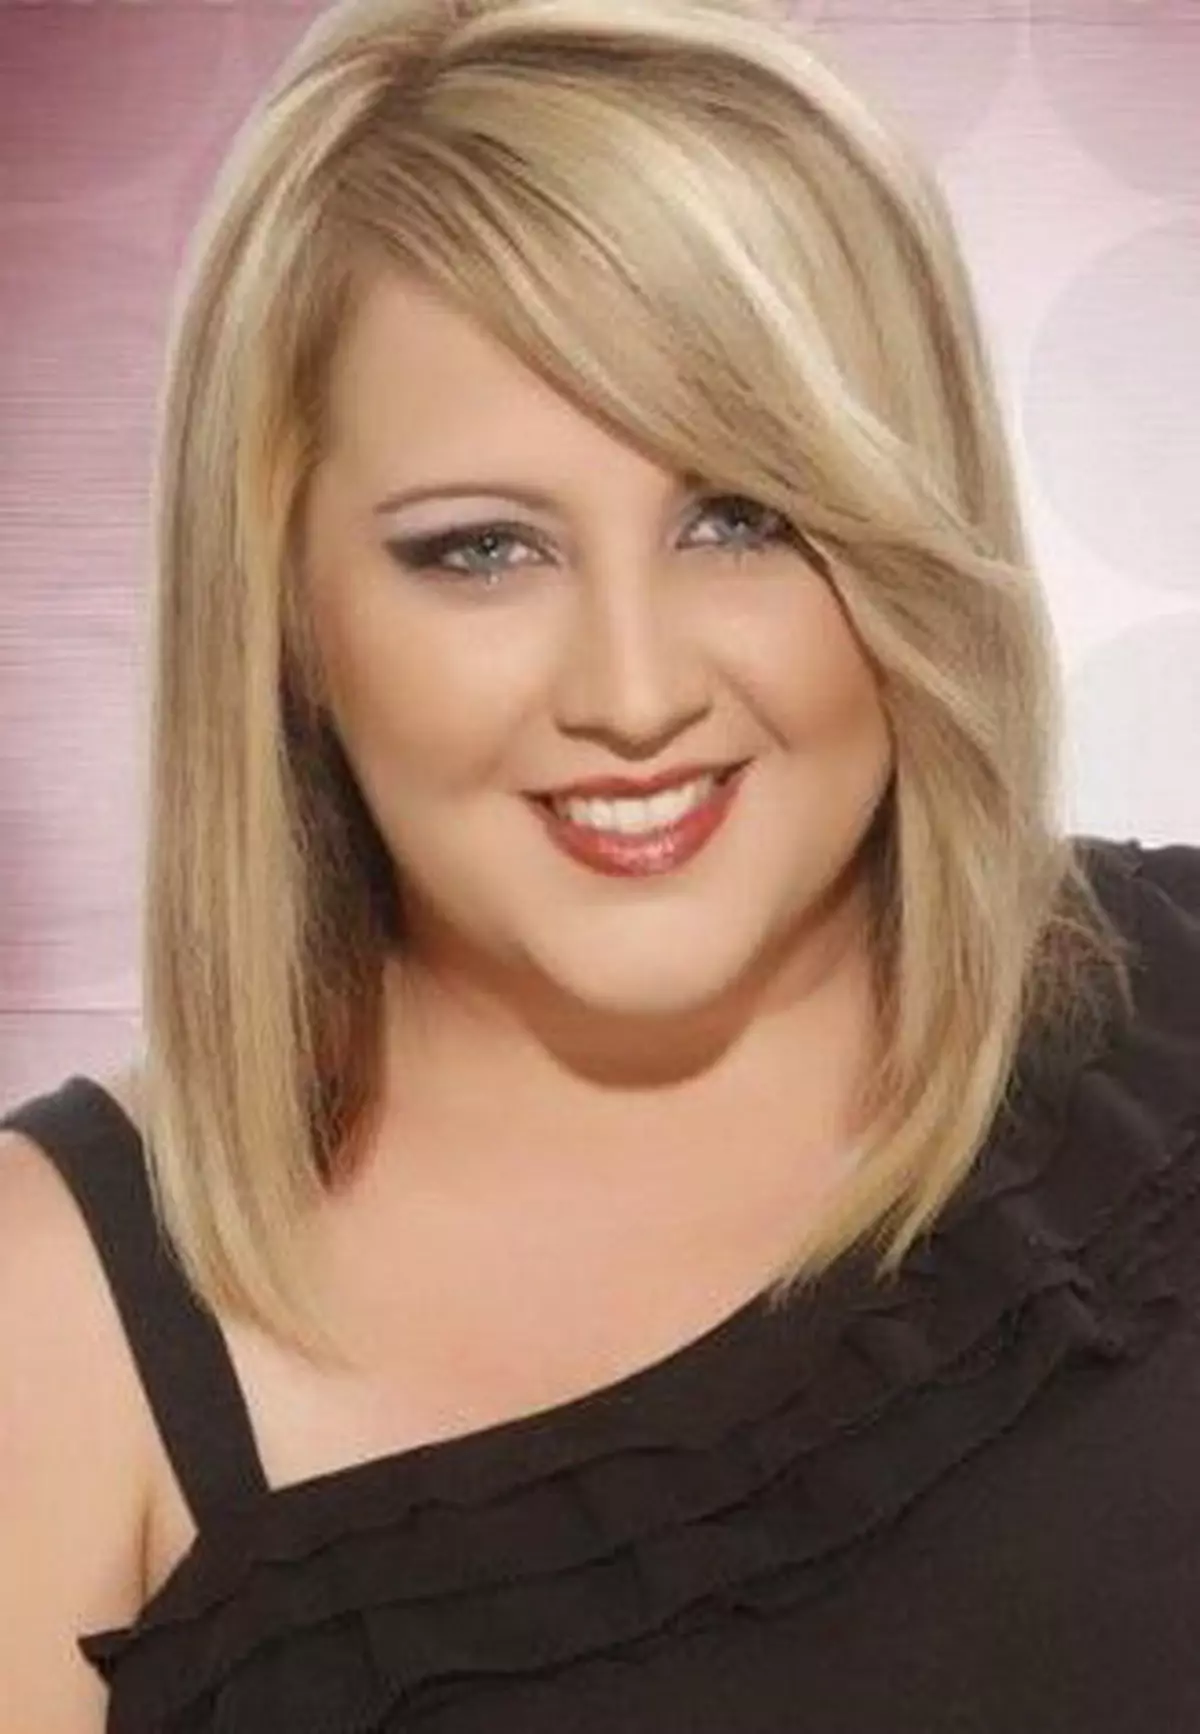 Haircuts for obese women after 40 years (36 photos): fashion styling and haircuts for short and medium hair. What haircuts are women with a round face? 5965_5